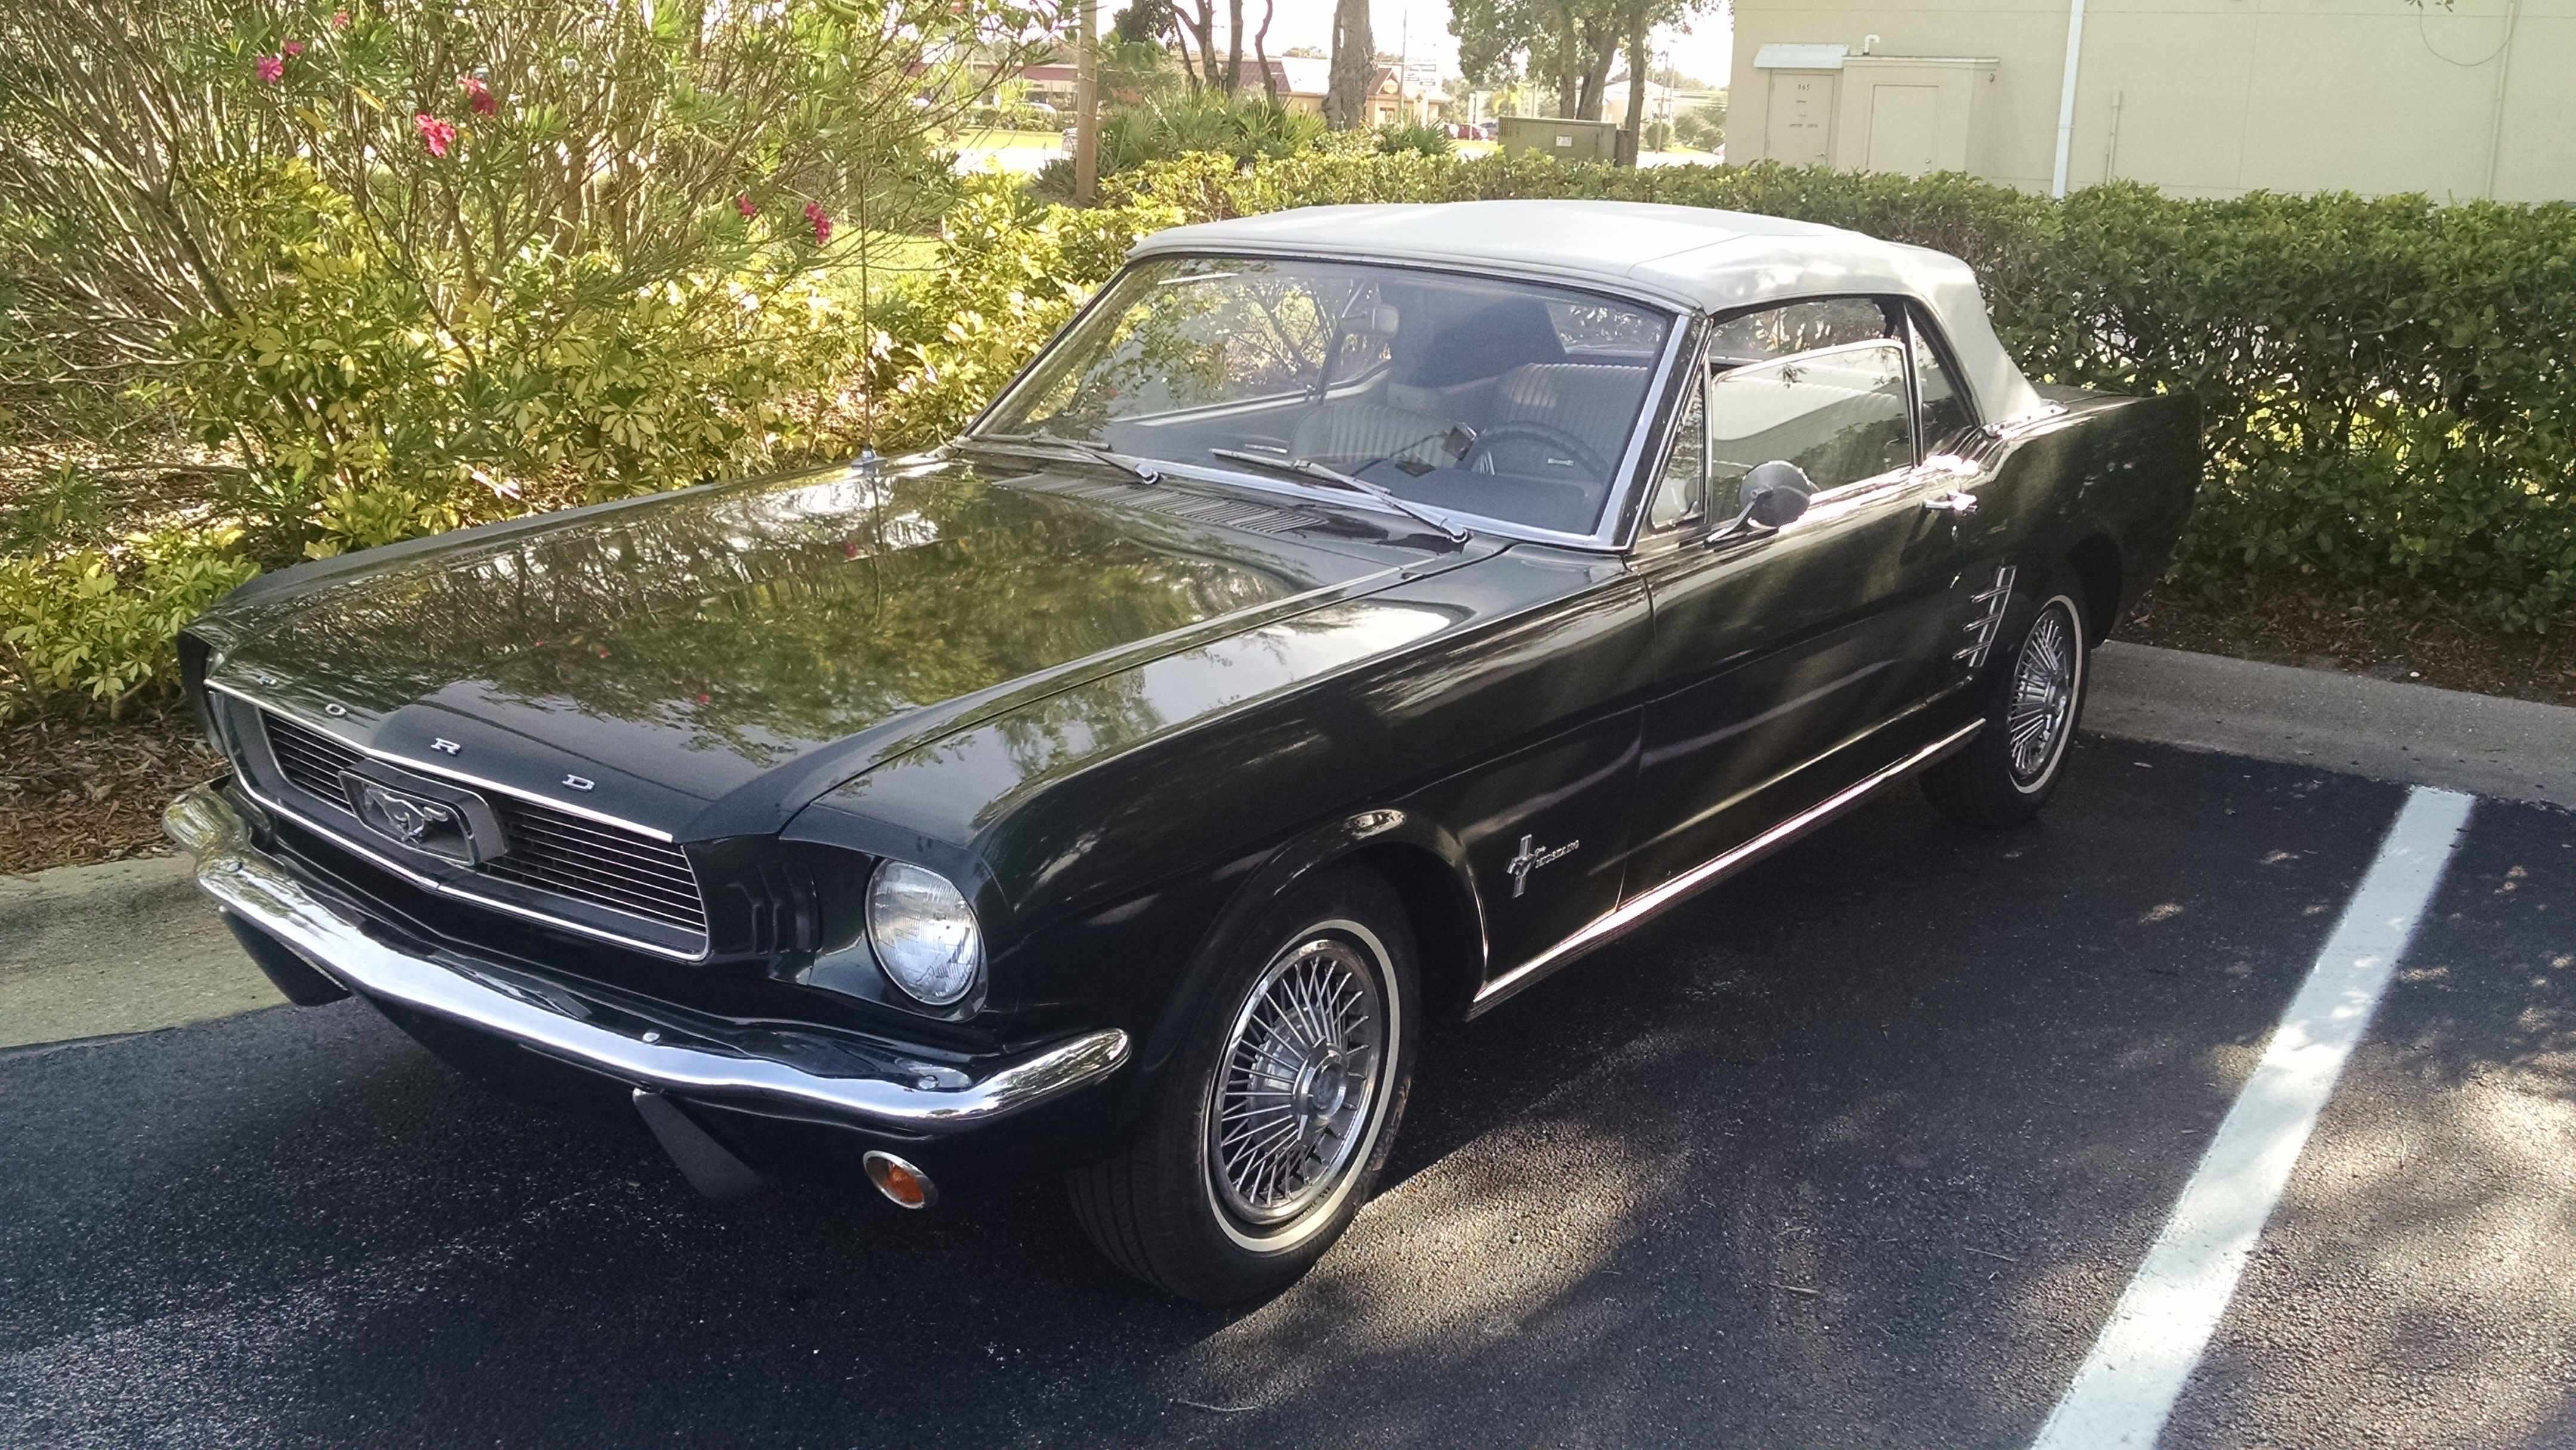 Ron & Pam's 1966 Mustang